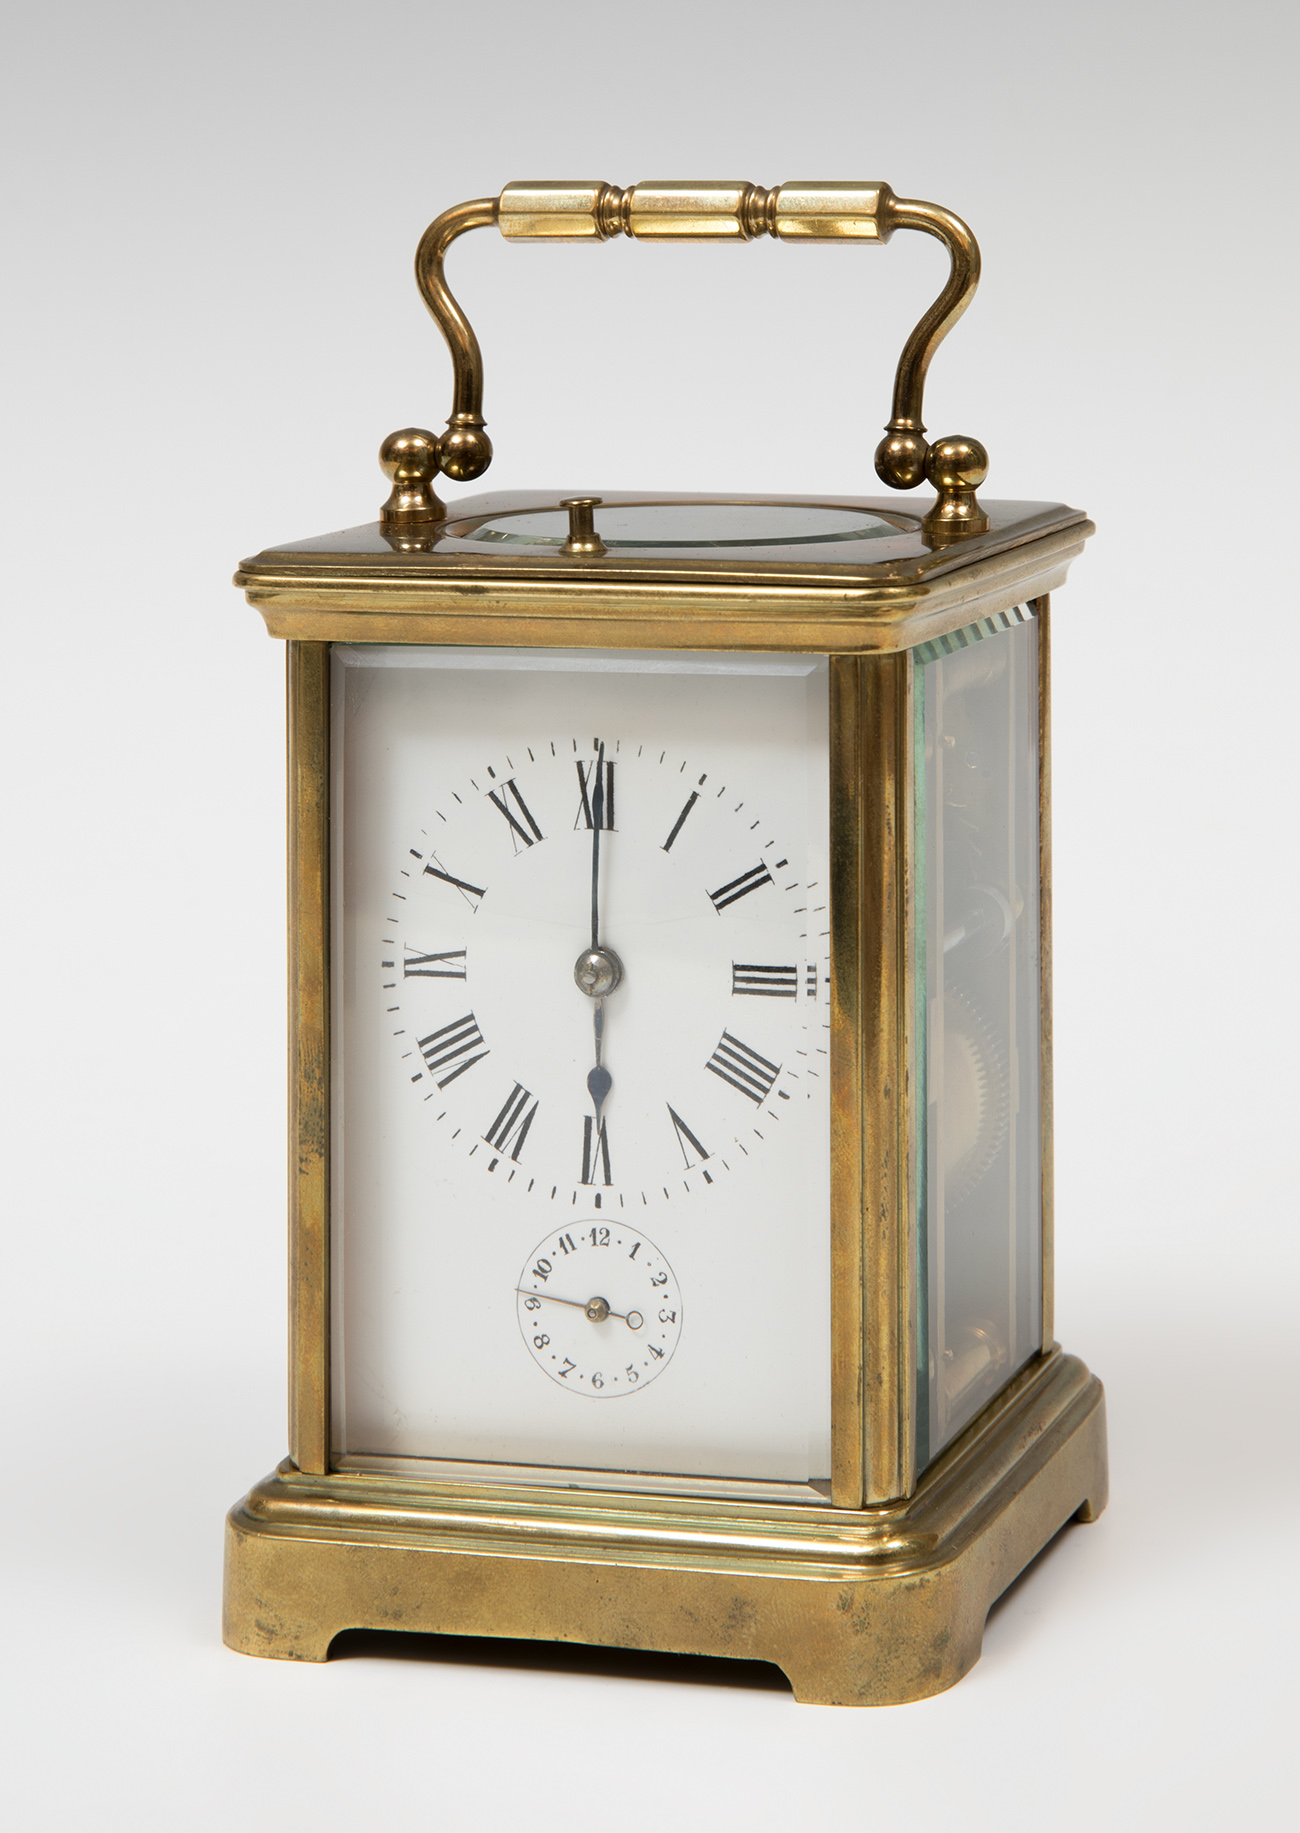 Travel clock; late 19th century.Bronze and bevelled glass.No key preserved.Precise set-up.